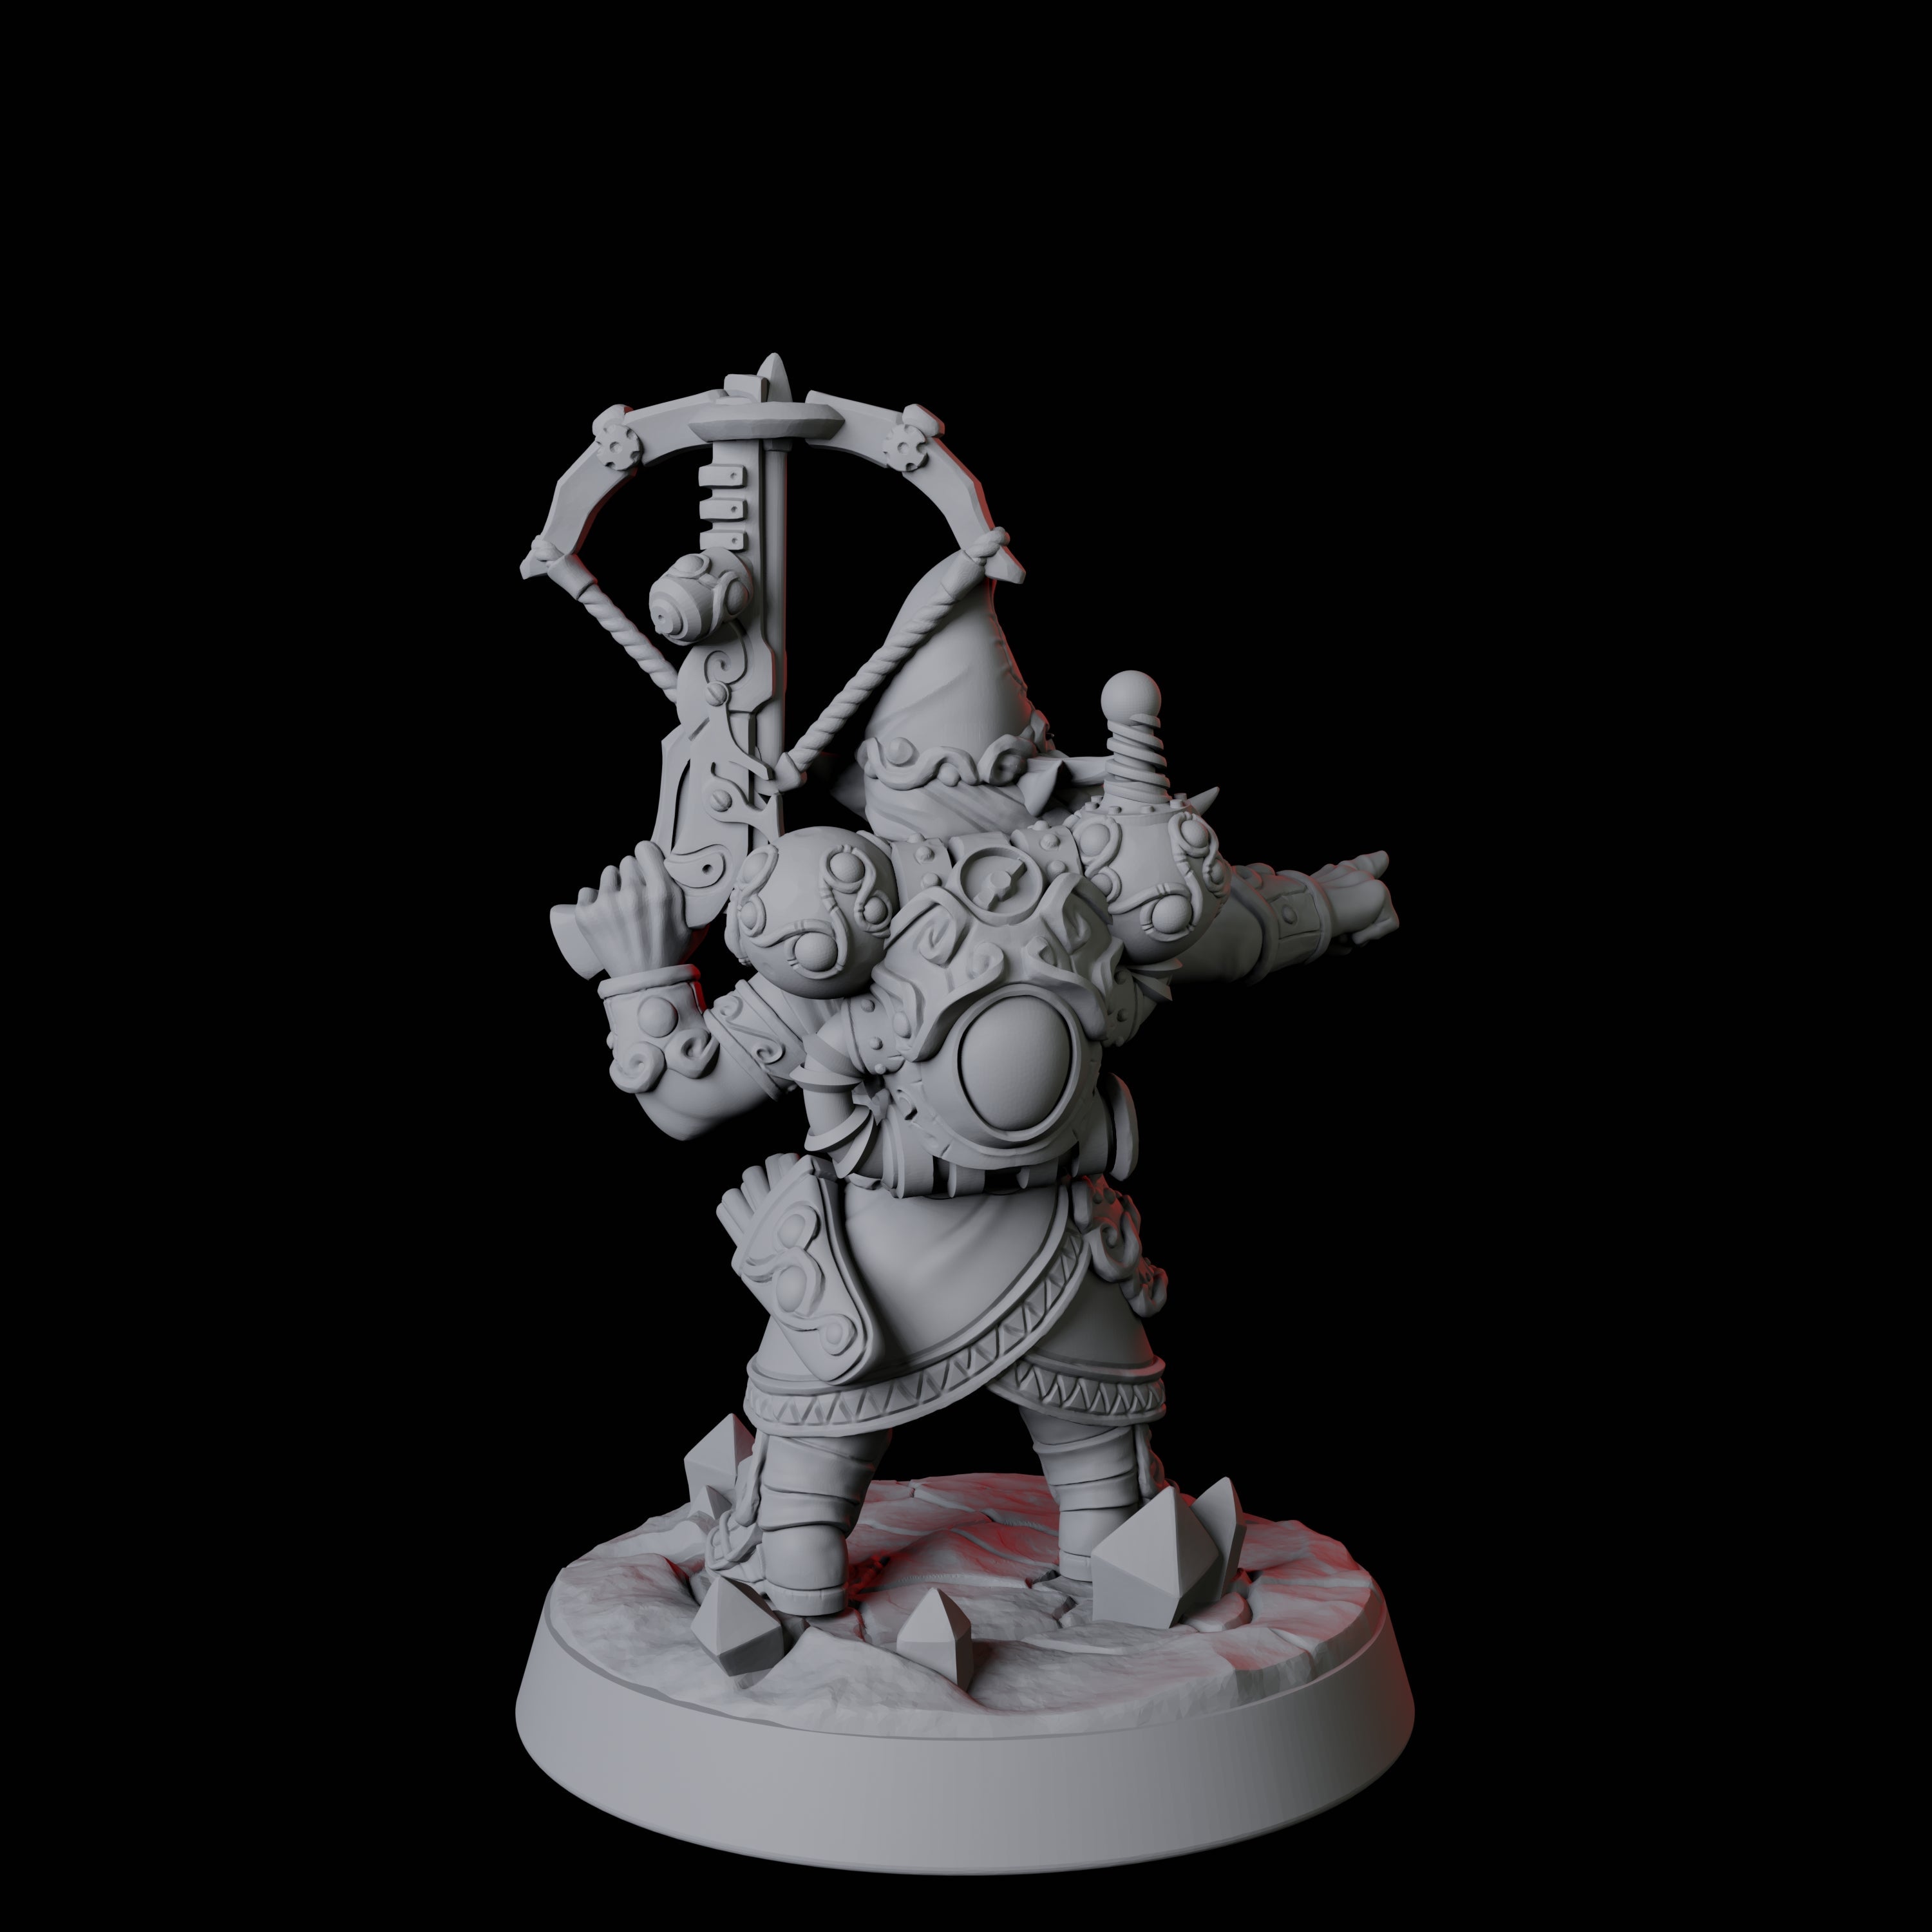 Deep Gnome Artificer E Miniature for Dungeons and Dragons, Pathfinder or other TTRPGs